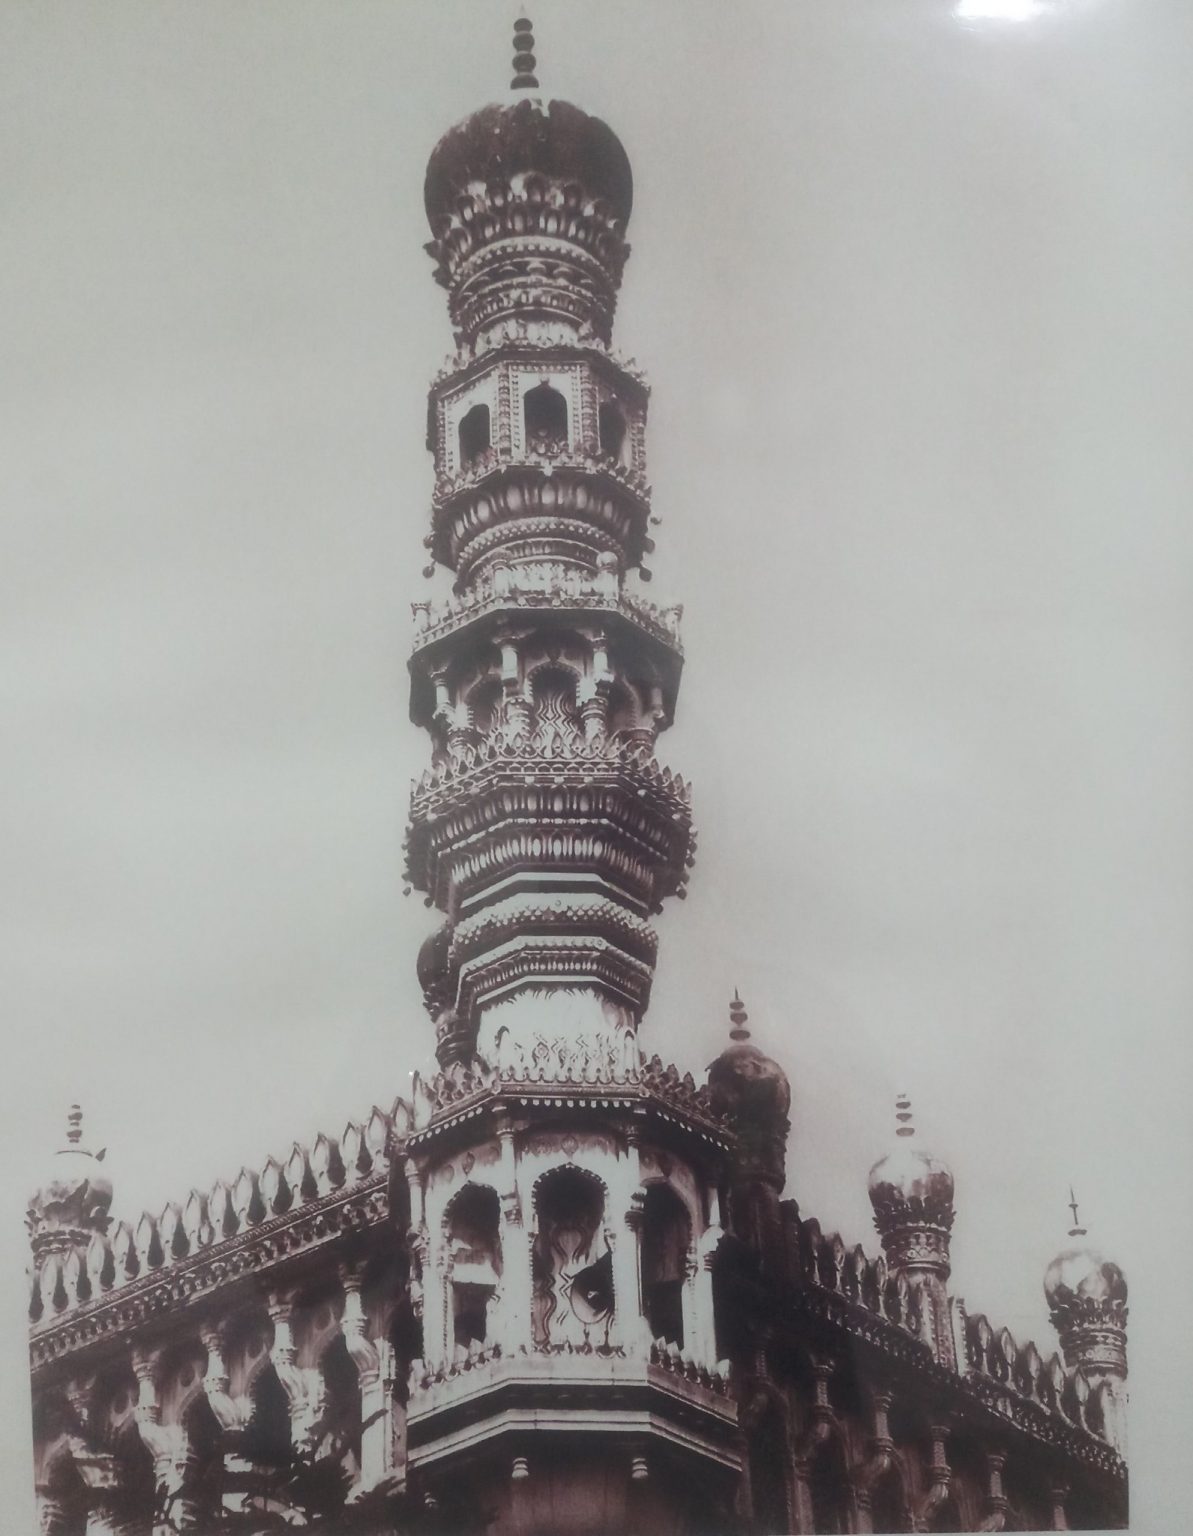 Toli Masjid detail from a 1920 publication.